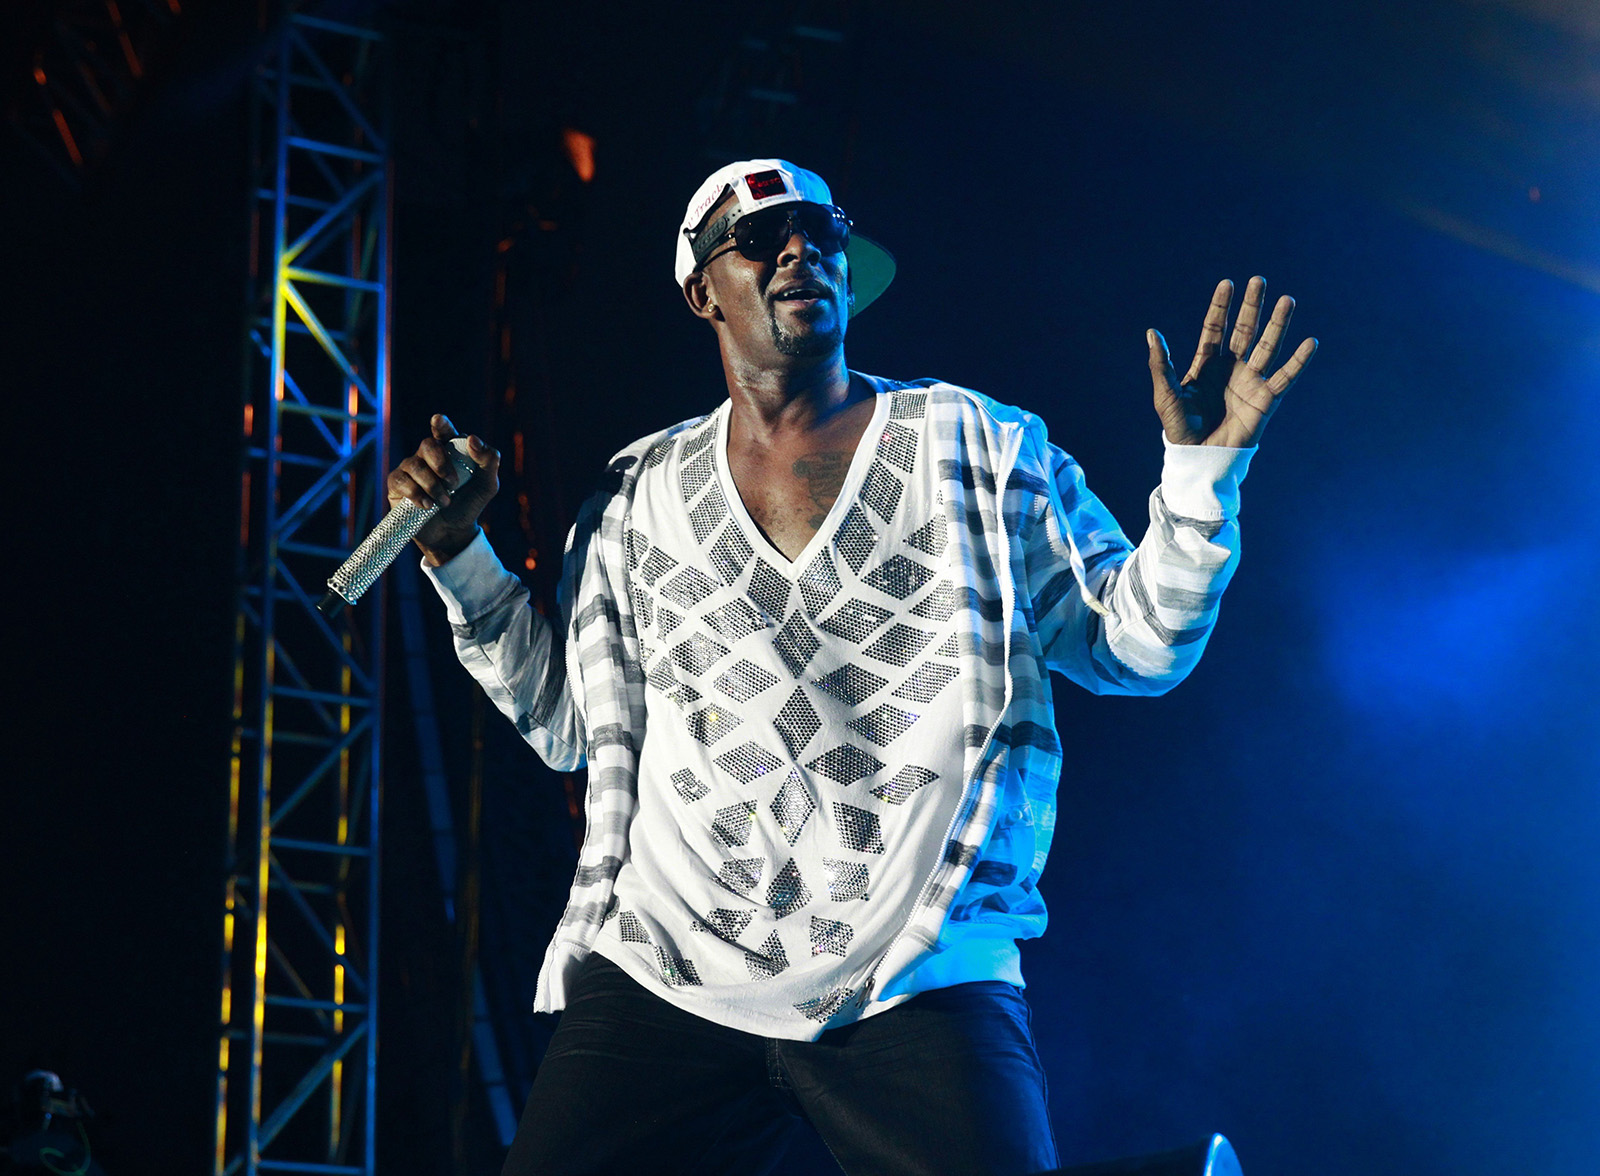 R. Kelly charged in Cook County with aggravated criminal sexual abuse